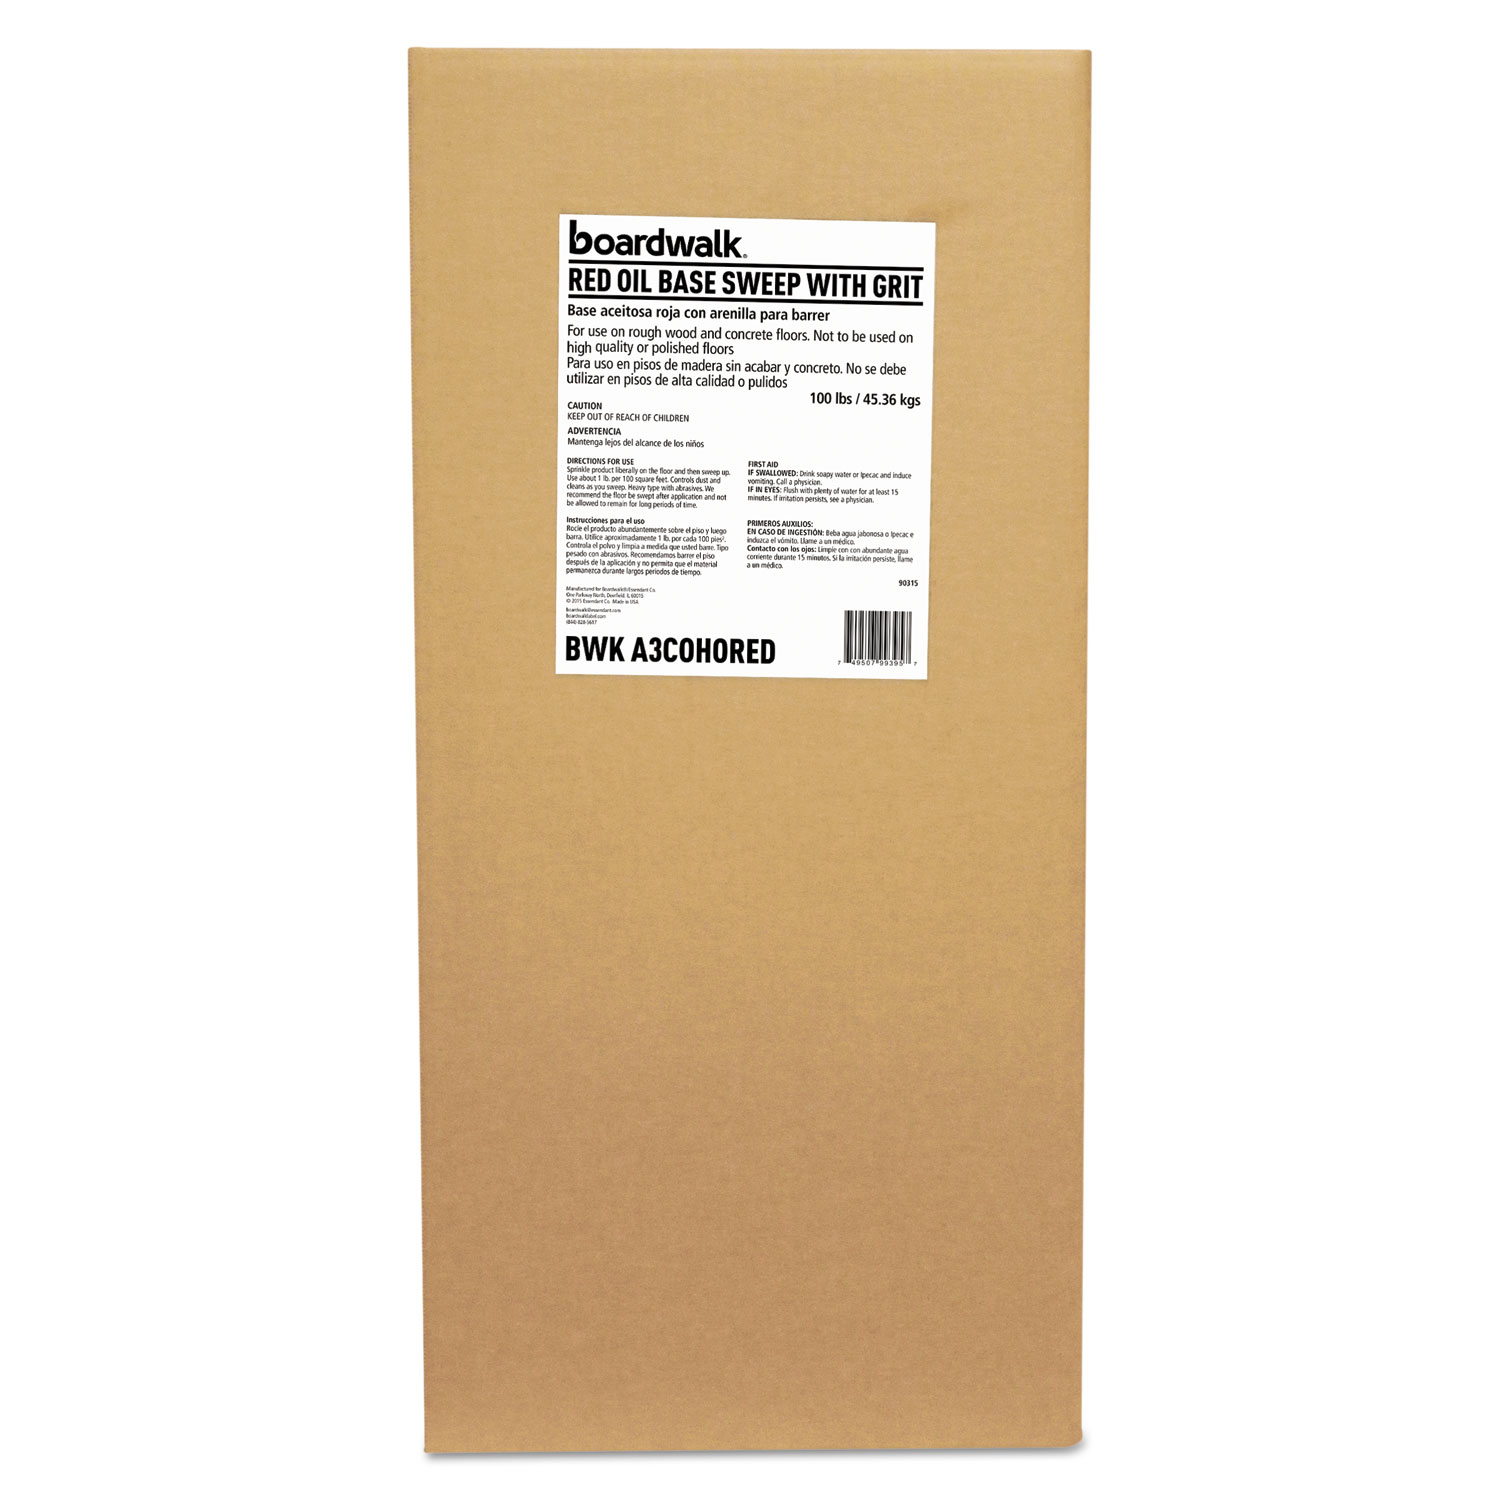 Oil-Based Sweeping Compound, Grit, Red, 100lbs, Box